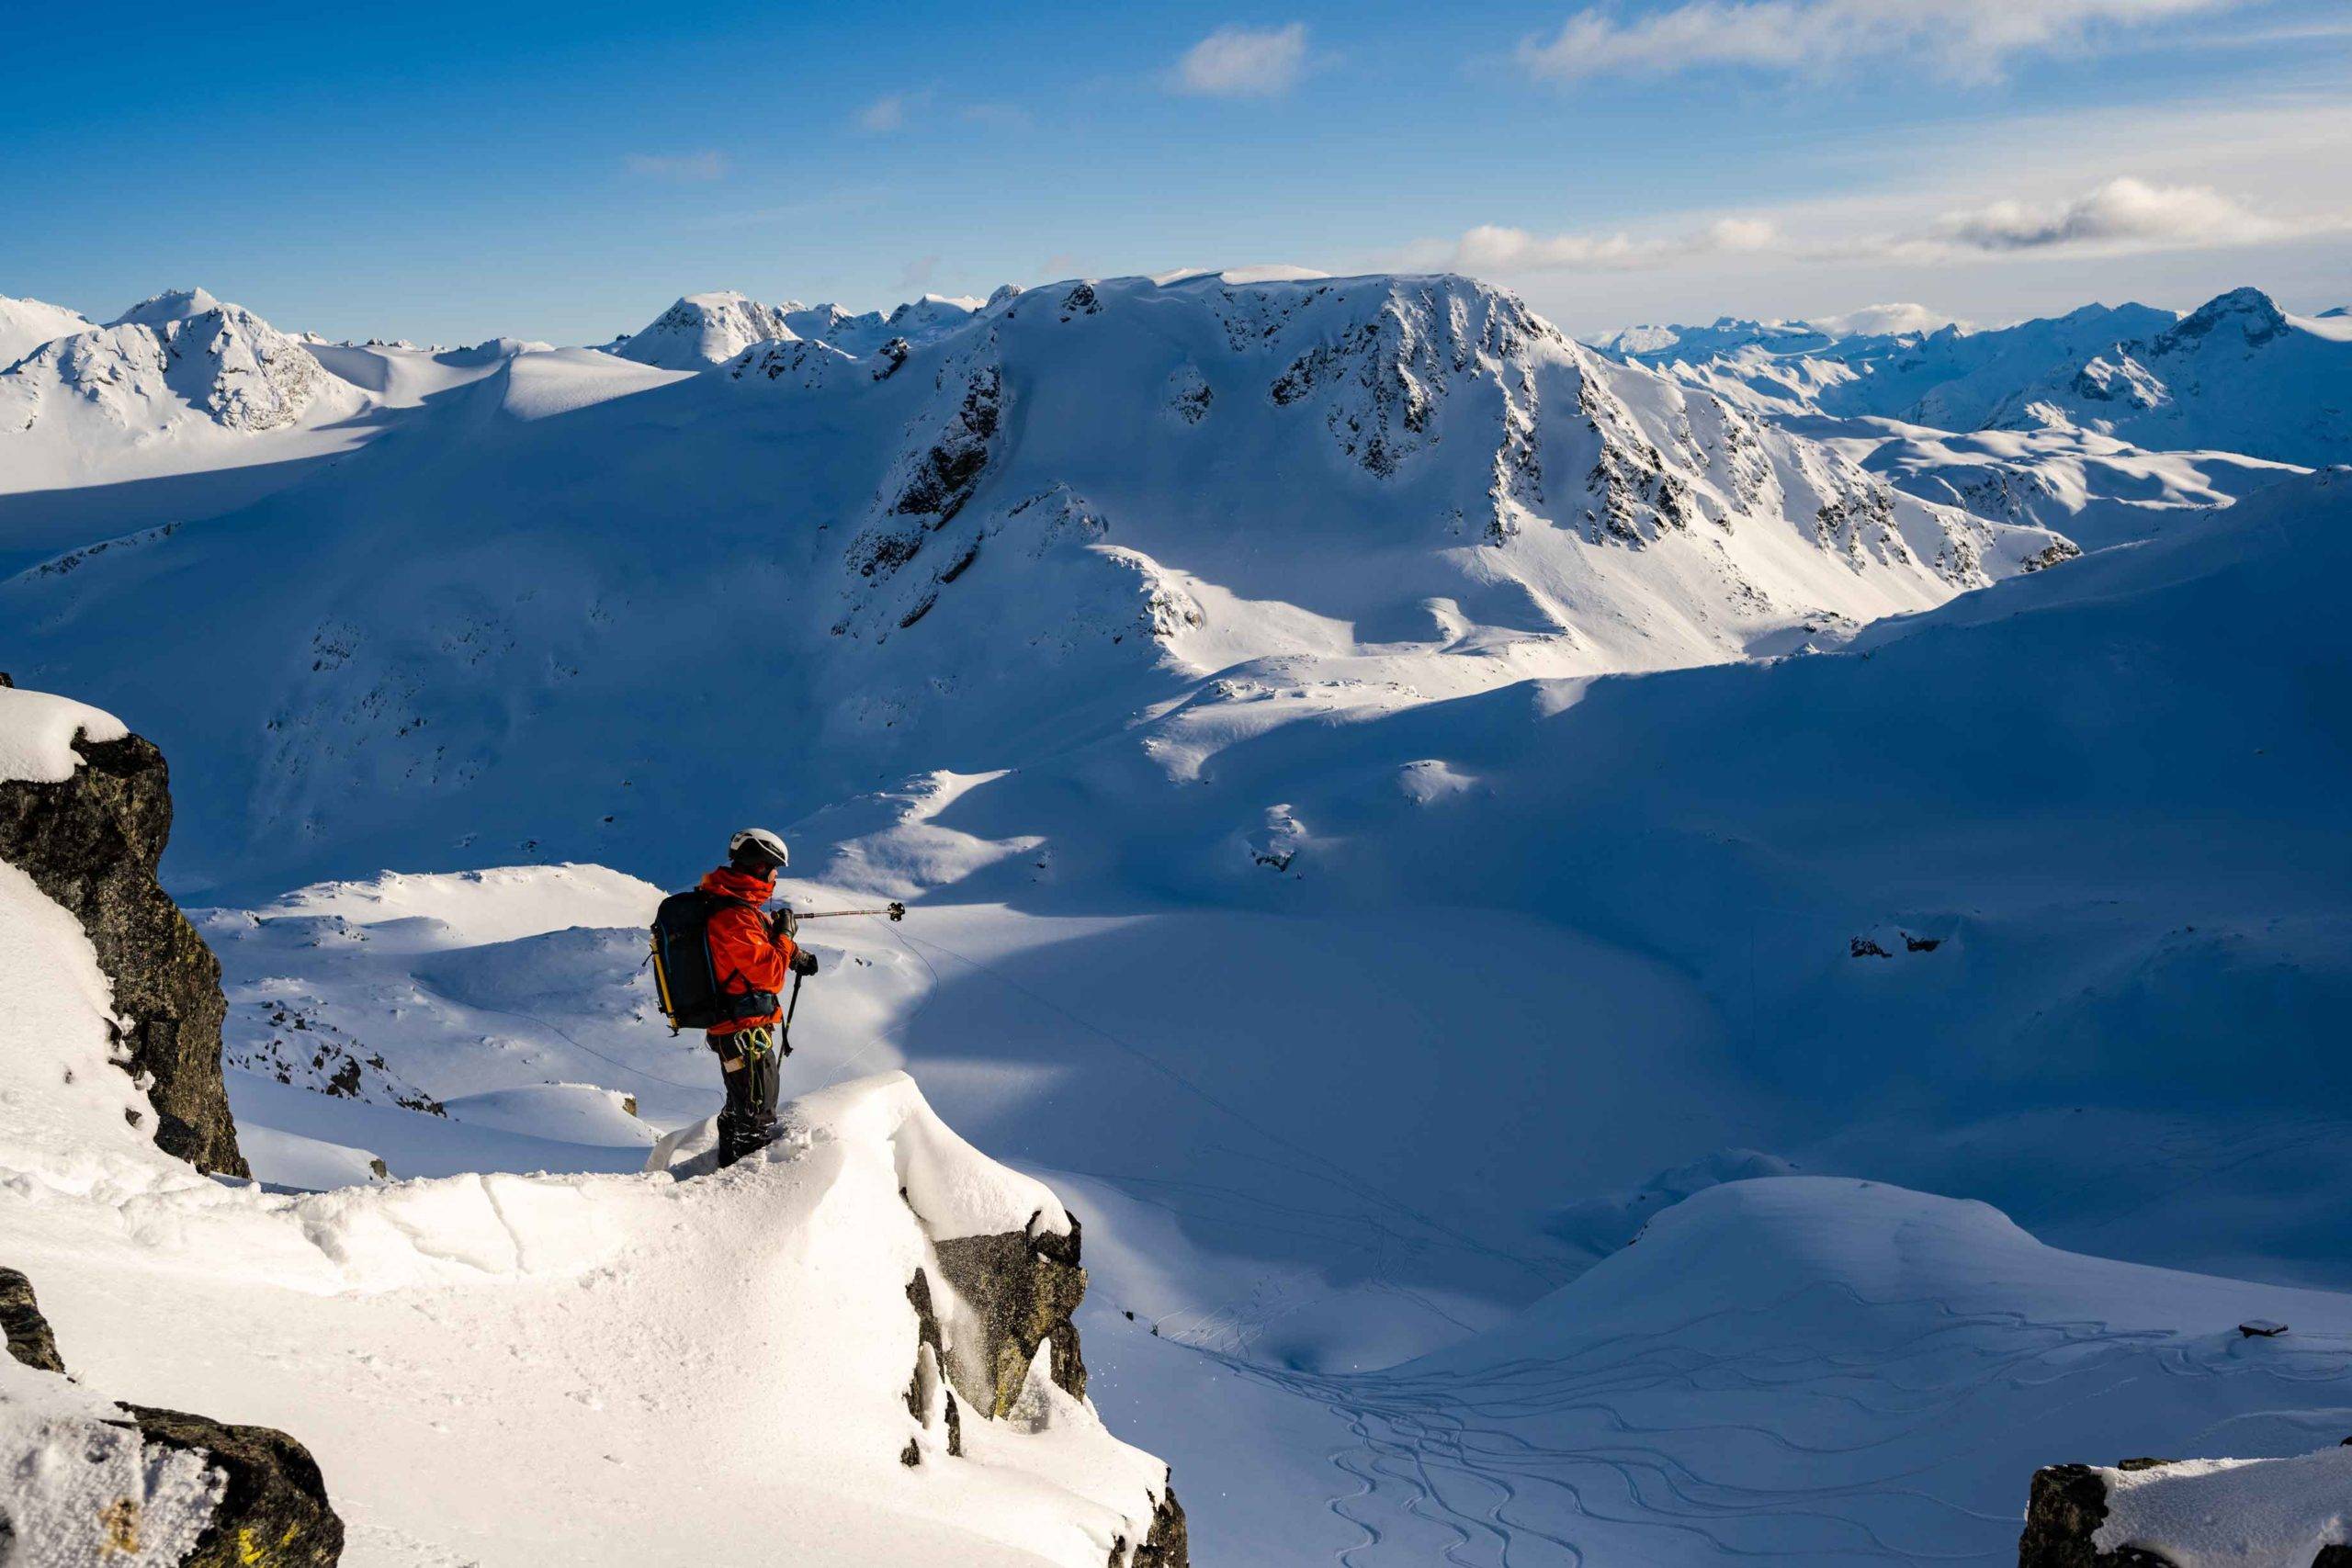 Spearhead Traverse – Whistler’s backcountry rite of passage